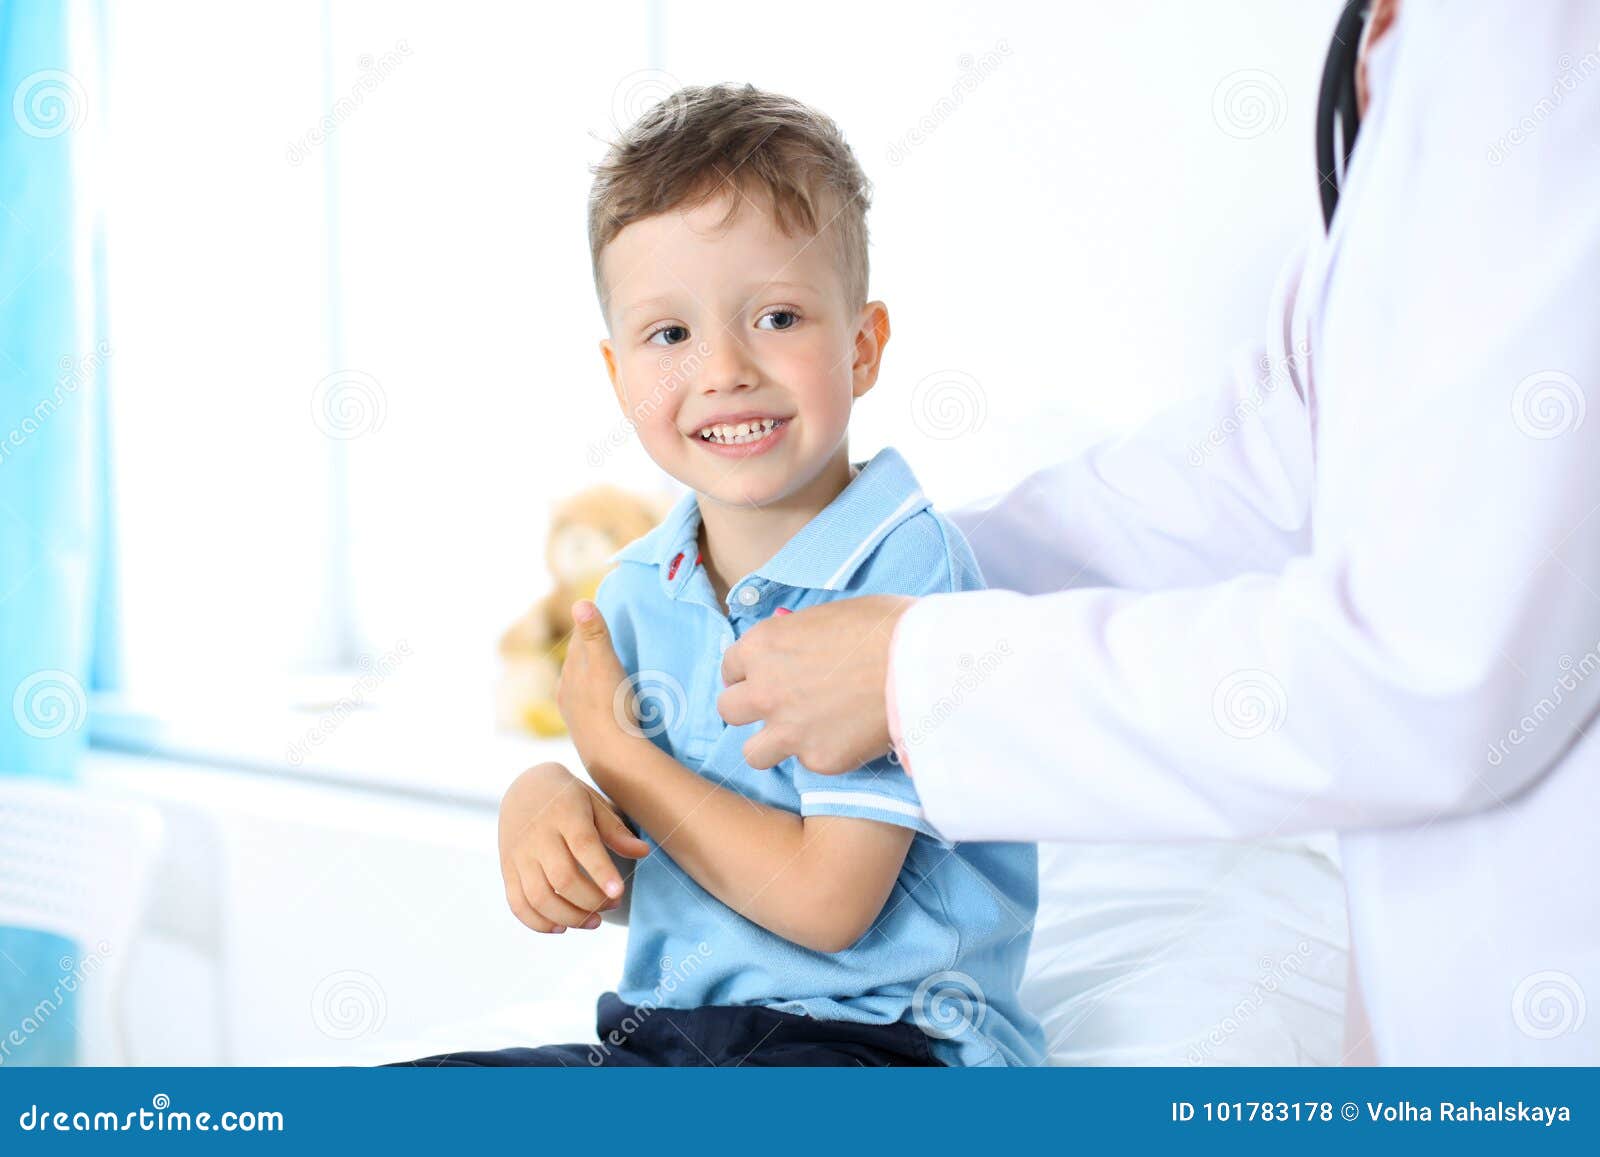 Female doctor using a digital tablet, close-up of hands. Health care concept or children`s therapy.